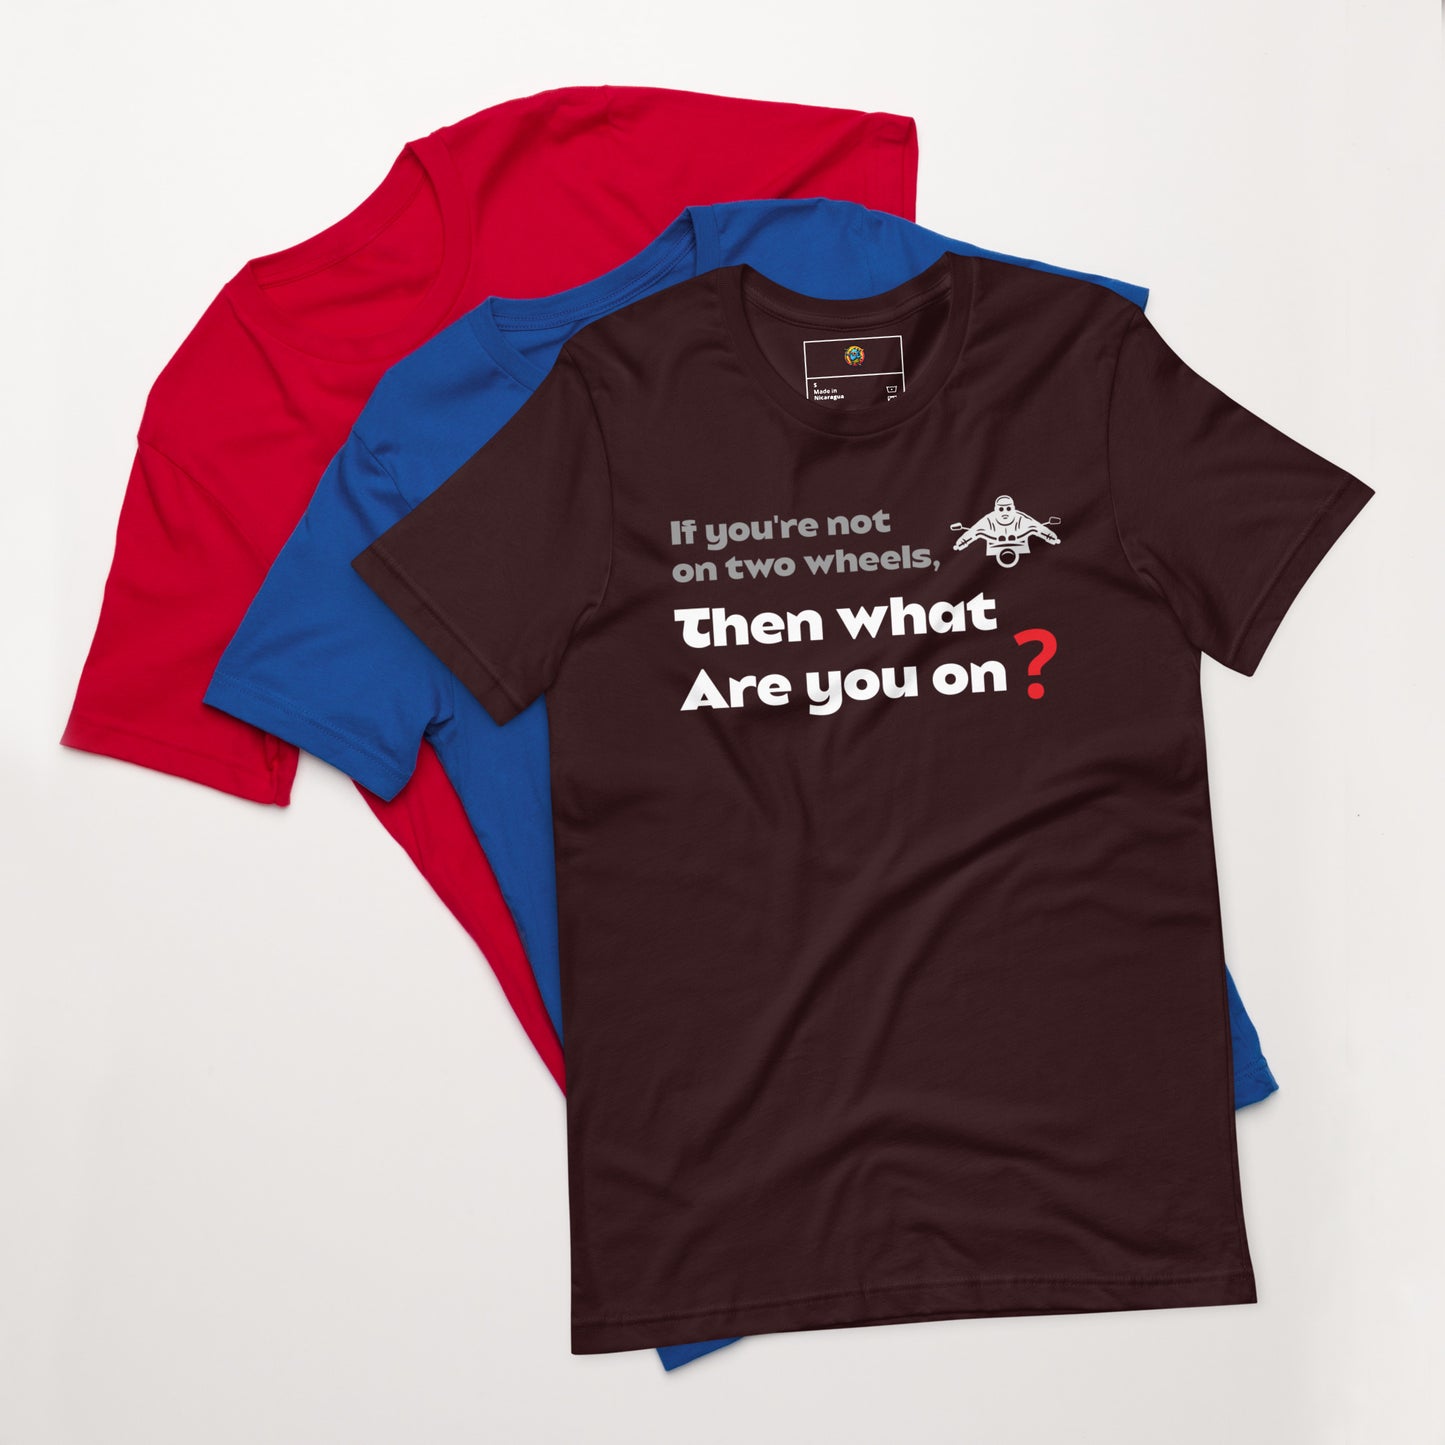 If you're not on two wheels, then what are you on? - Unisex t-shirt